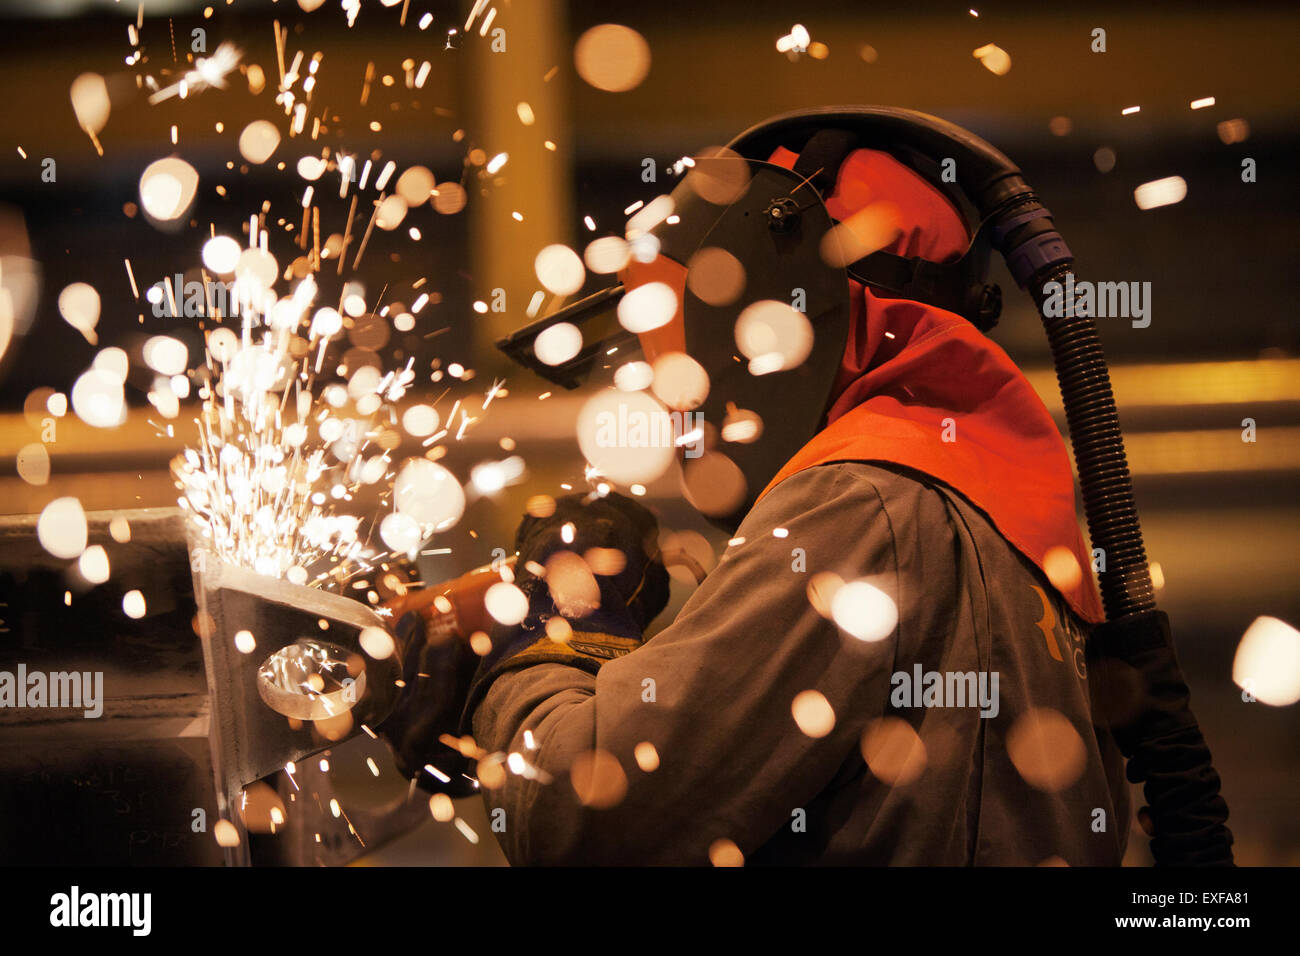 Sparks and worker using grinder Stock Photo